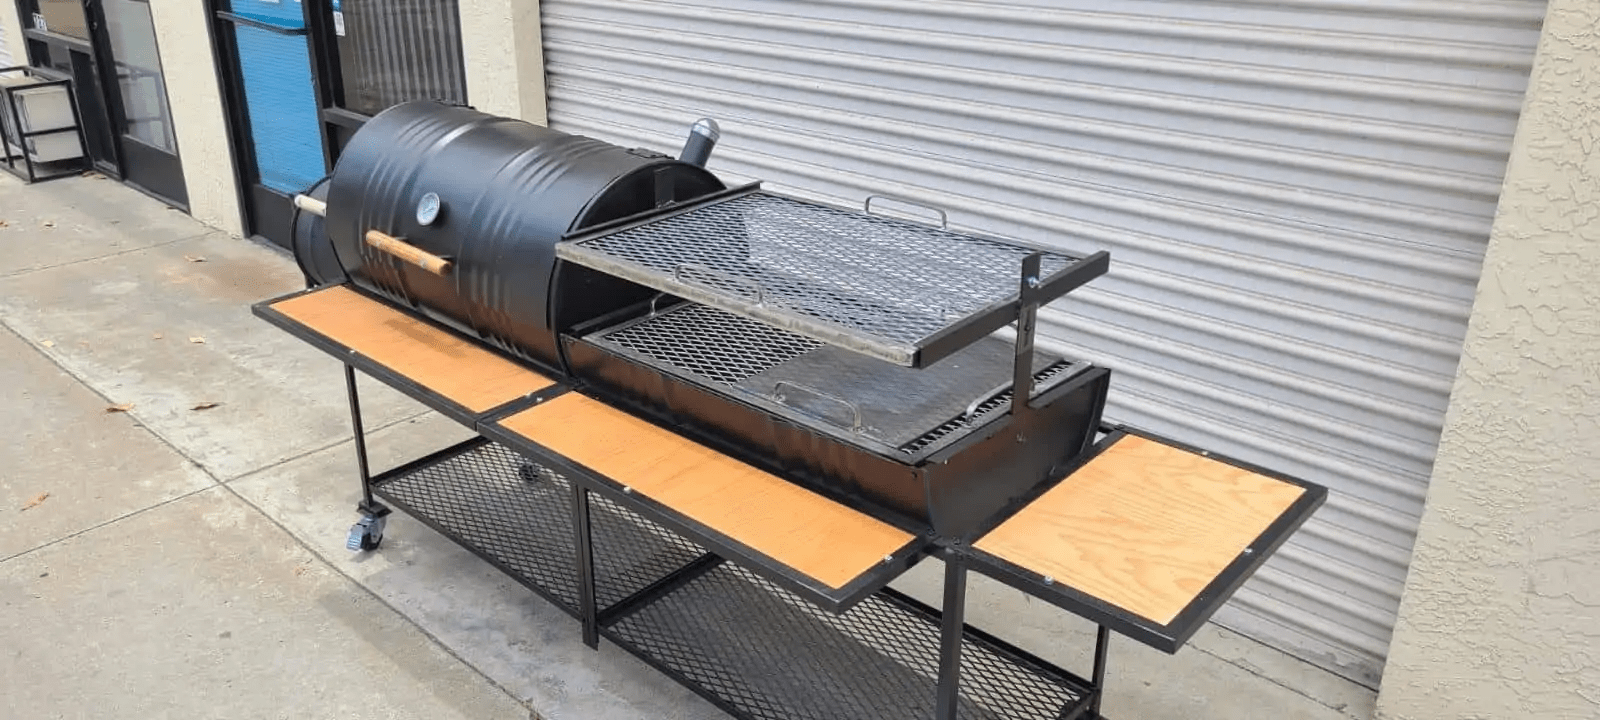 Moss Grills Joeys Ranch Style Barbecue Grill / 55 Gal Barrel Smoker + Open  Ranch Grill / Residential or Commercial / #208